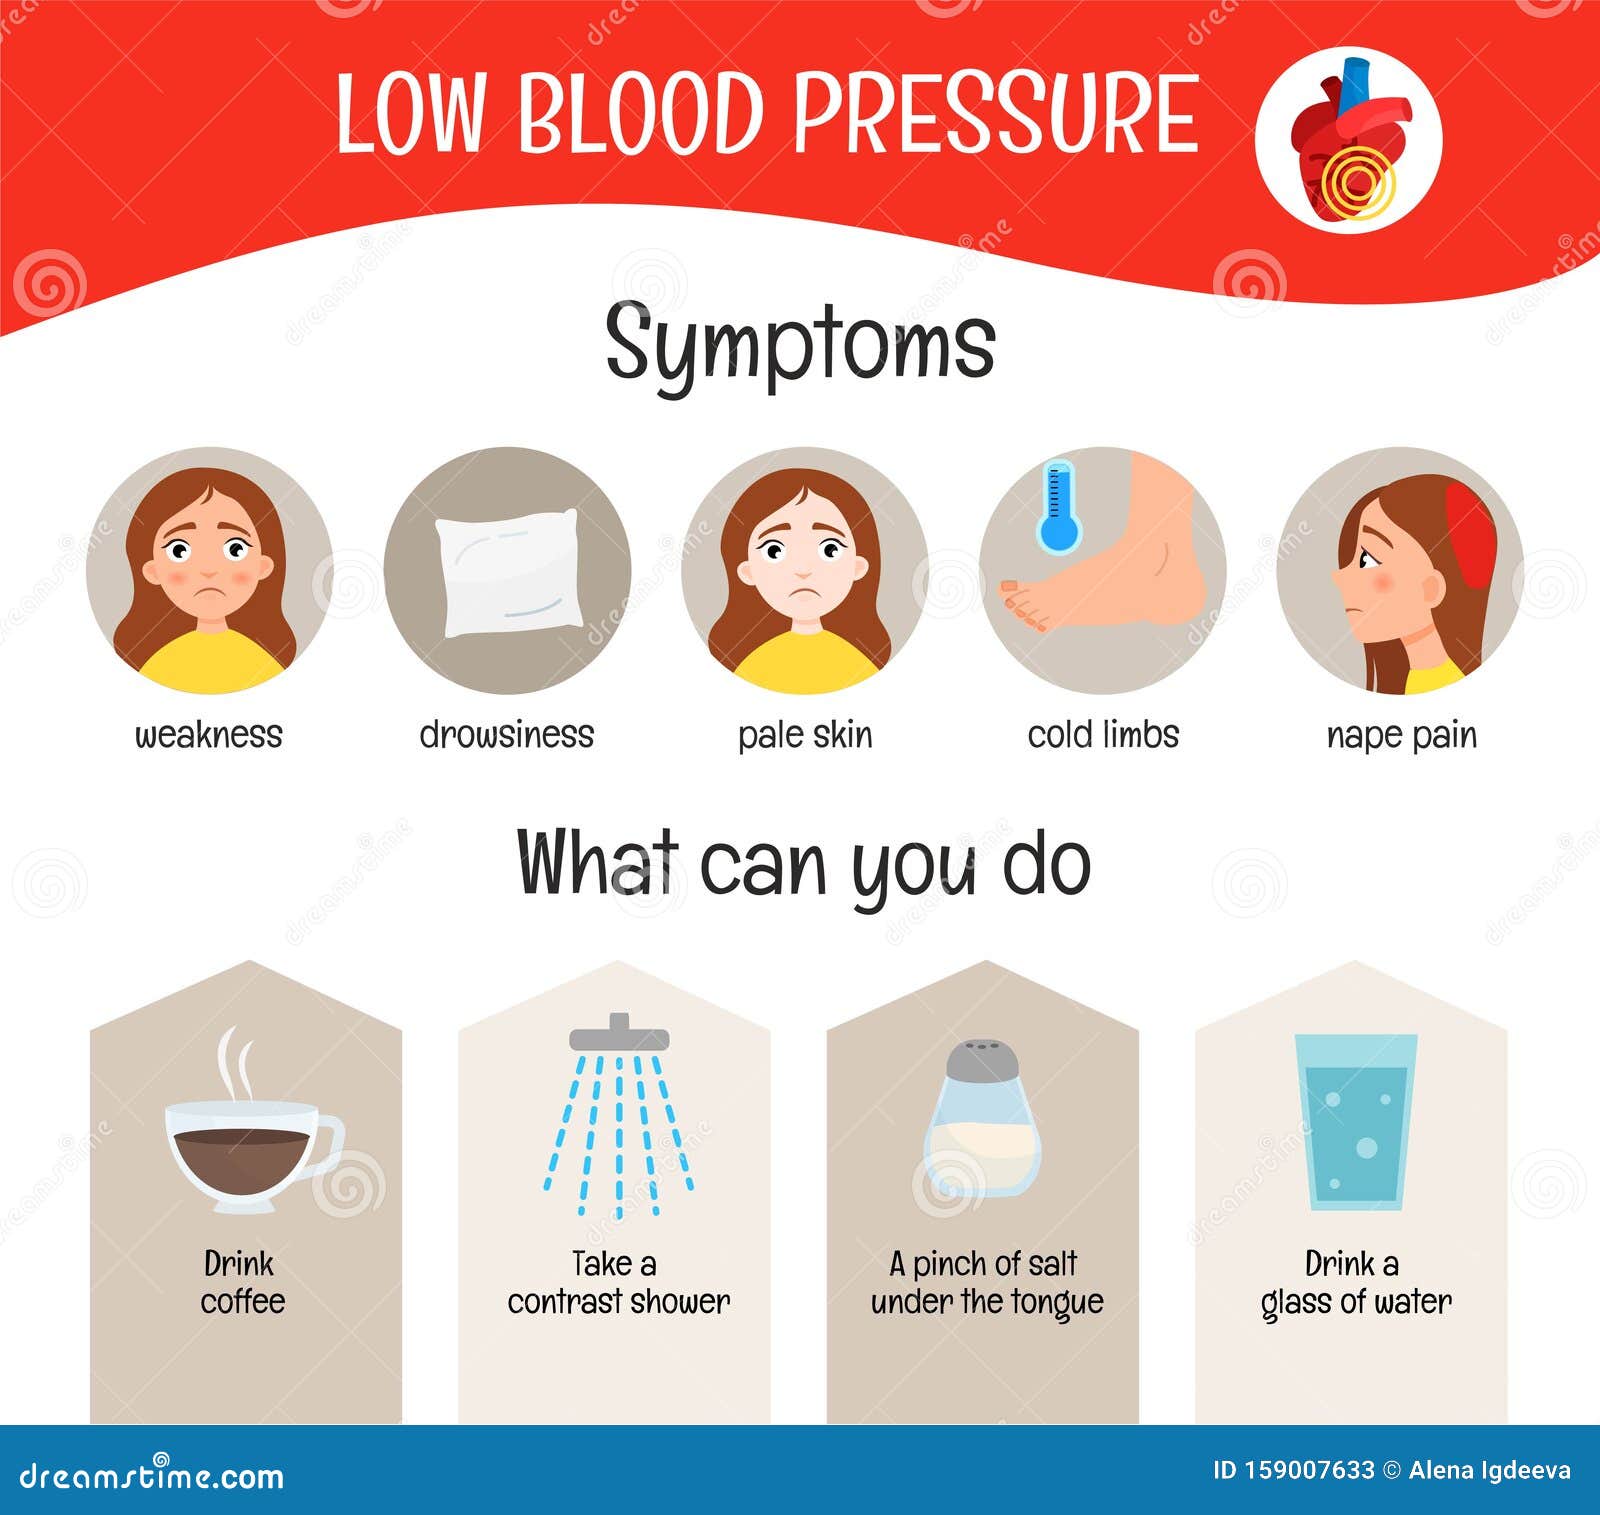 Seven things to eat or avoid to lower your blood pressure | IFLScience